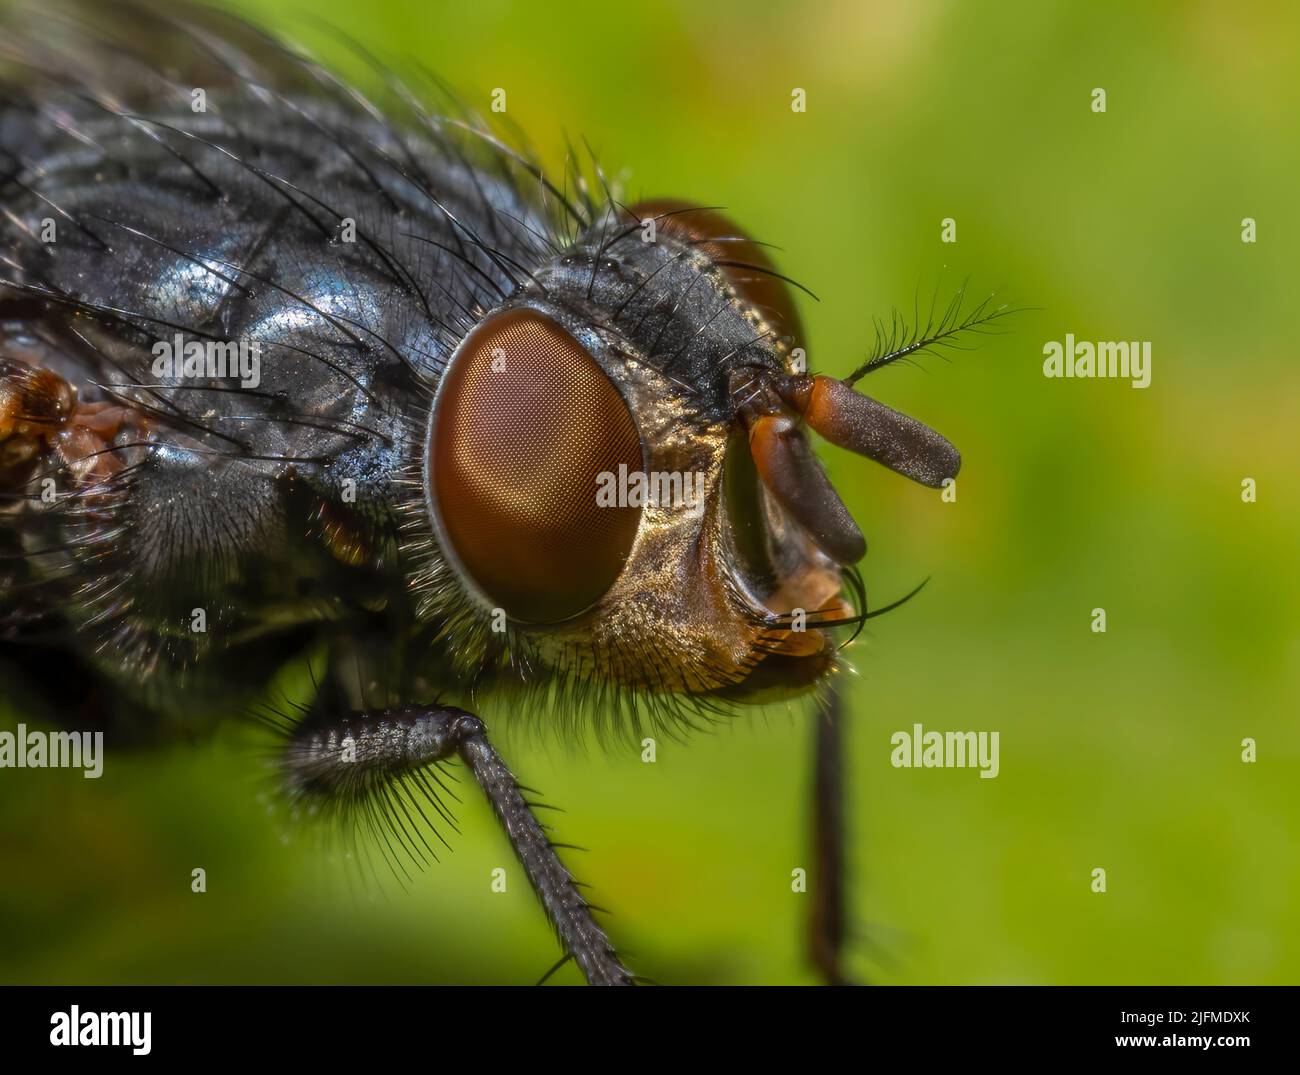 A close up of the head of fly species - Calliphora vicina showing the large eyes and numerous protuberances Stock Photo